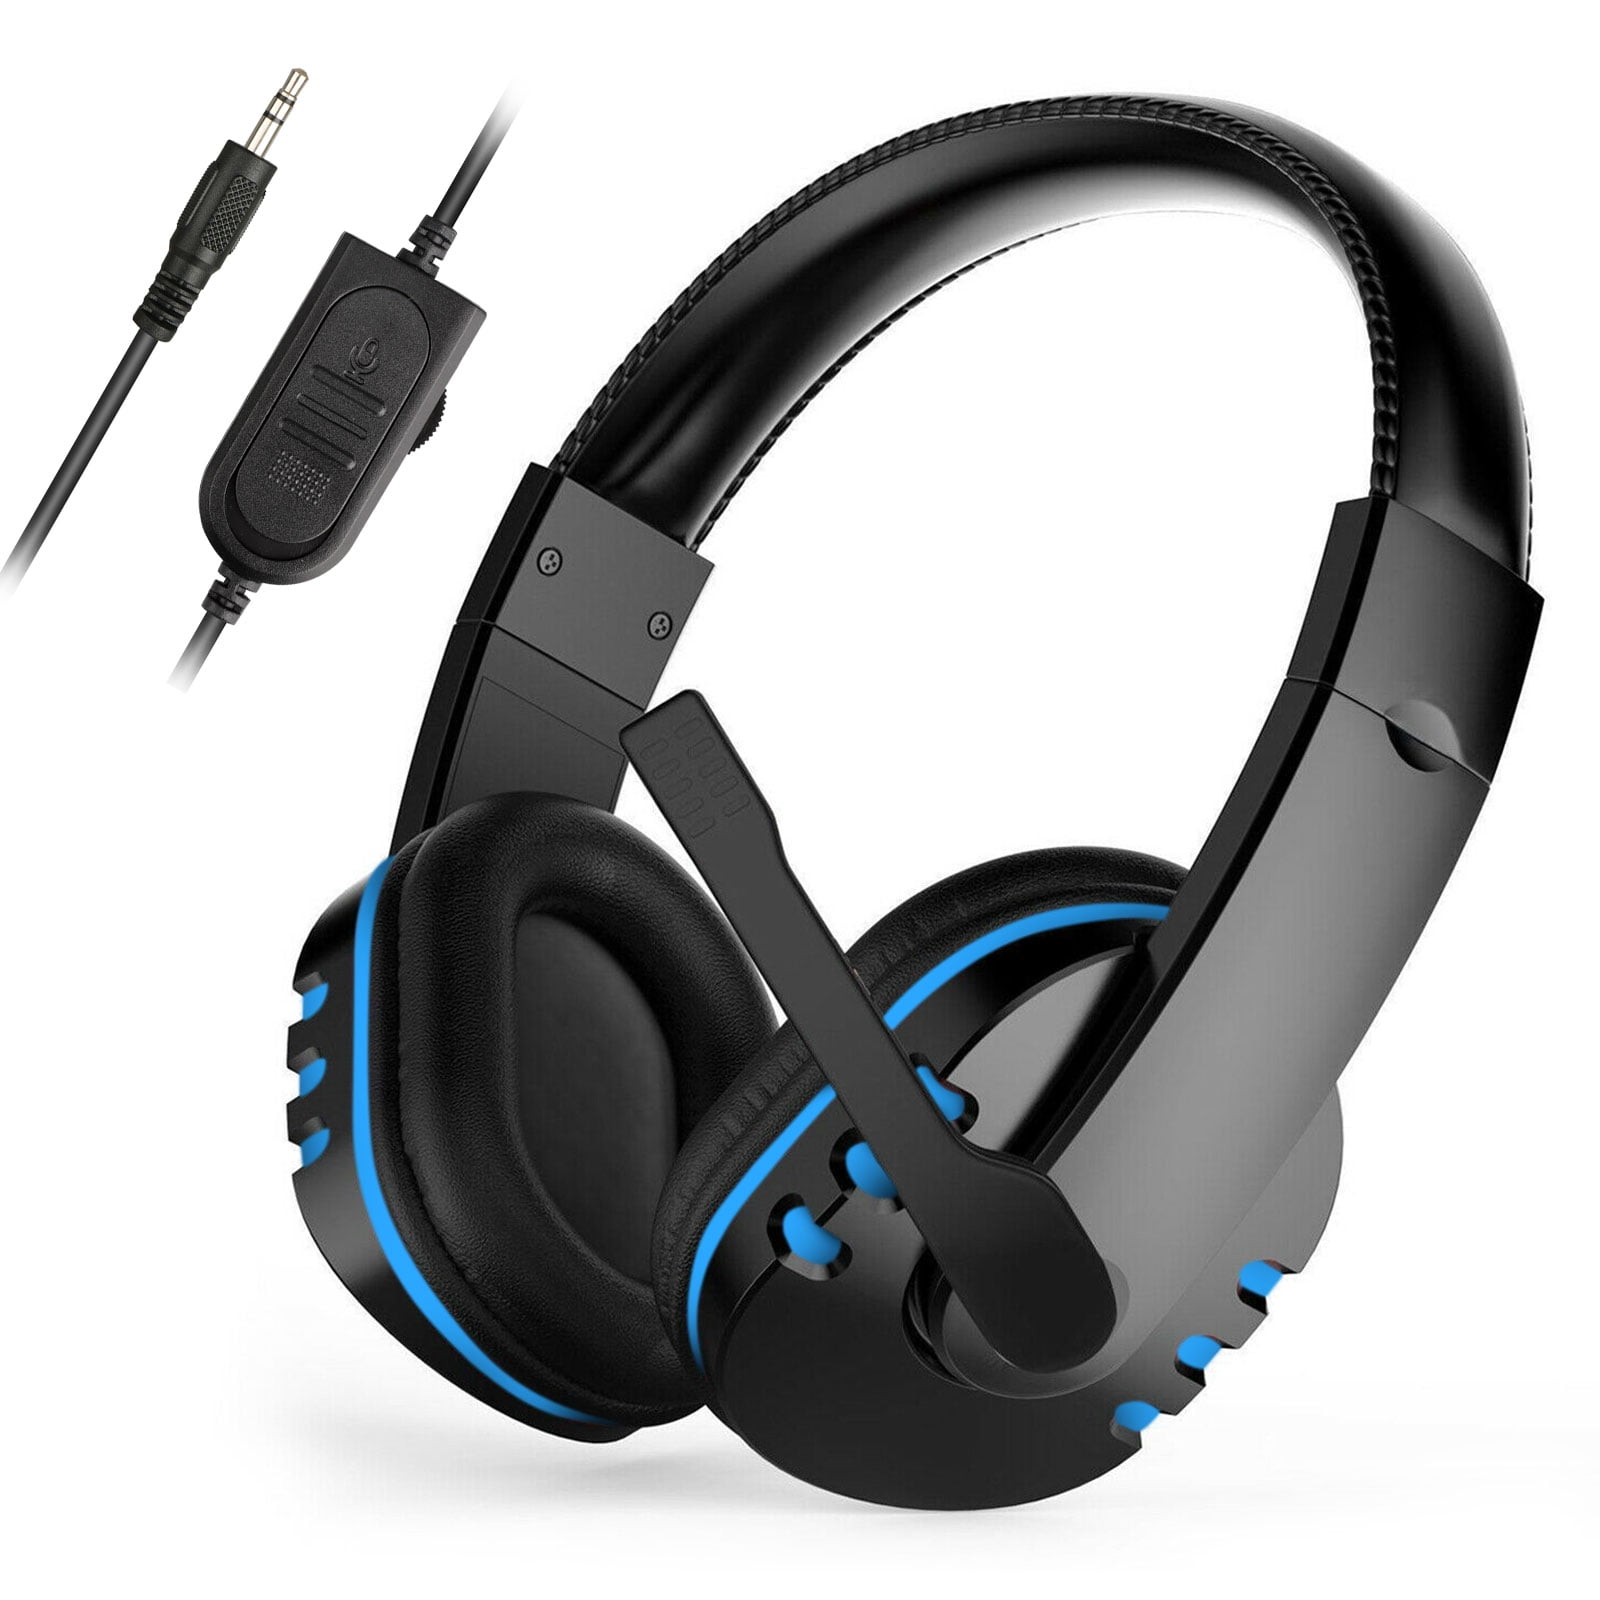 Stereo Gaming Headset For Ps4 Xbox One Pc Noise - bad games roblox xbox onepc review